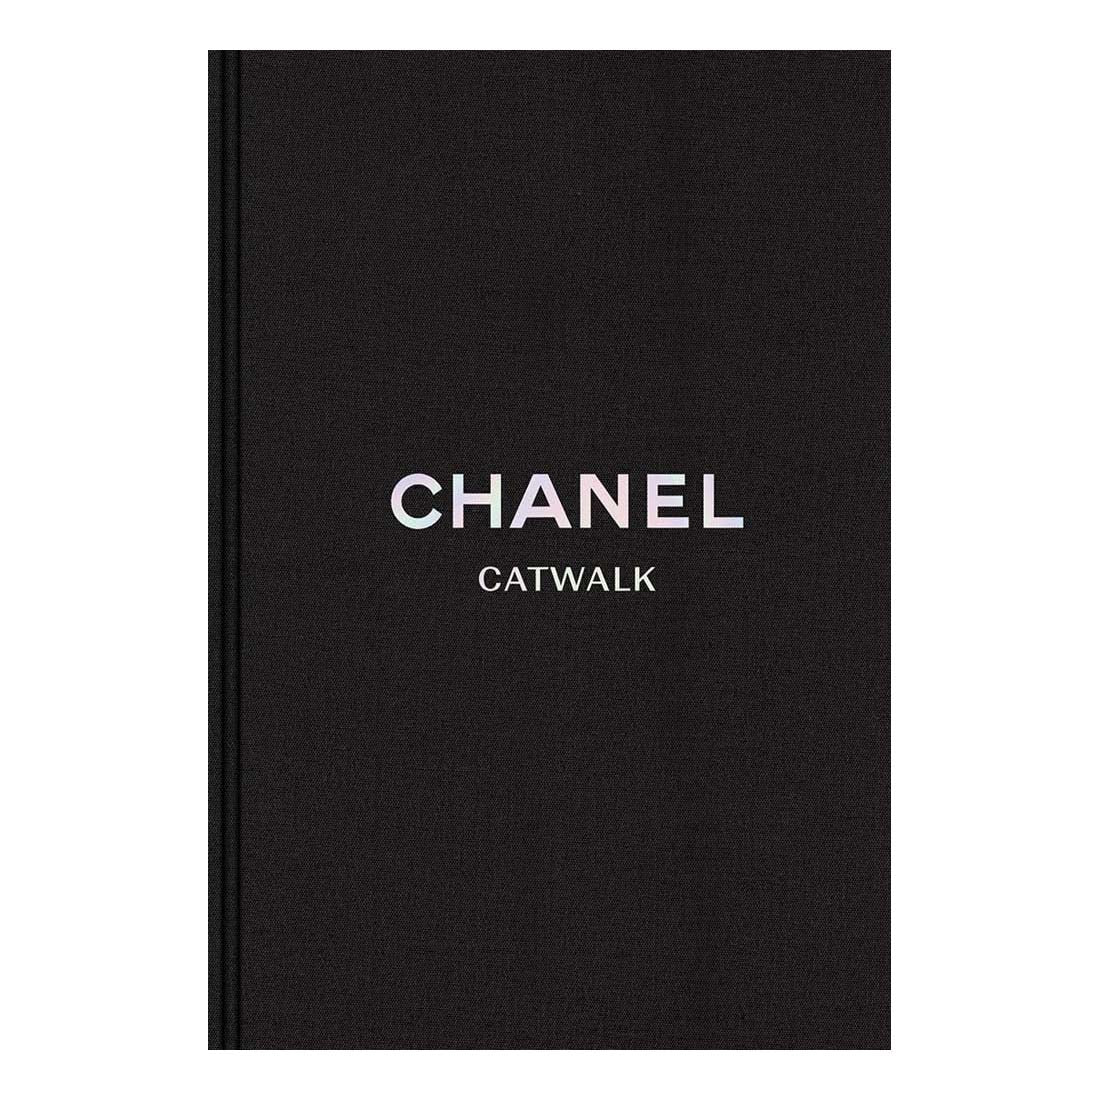 Chanel: The Complete Collections